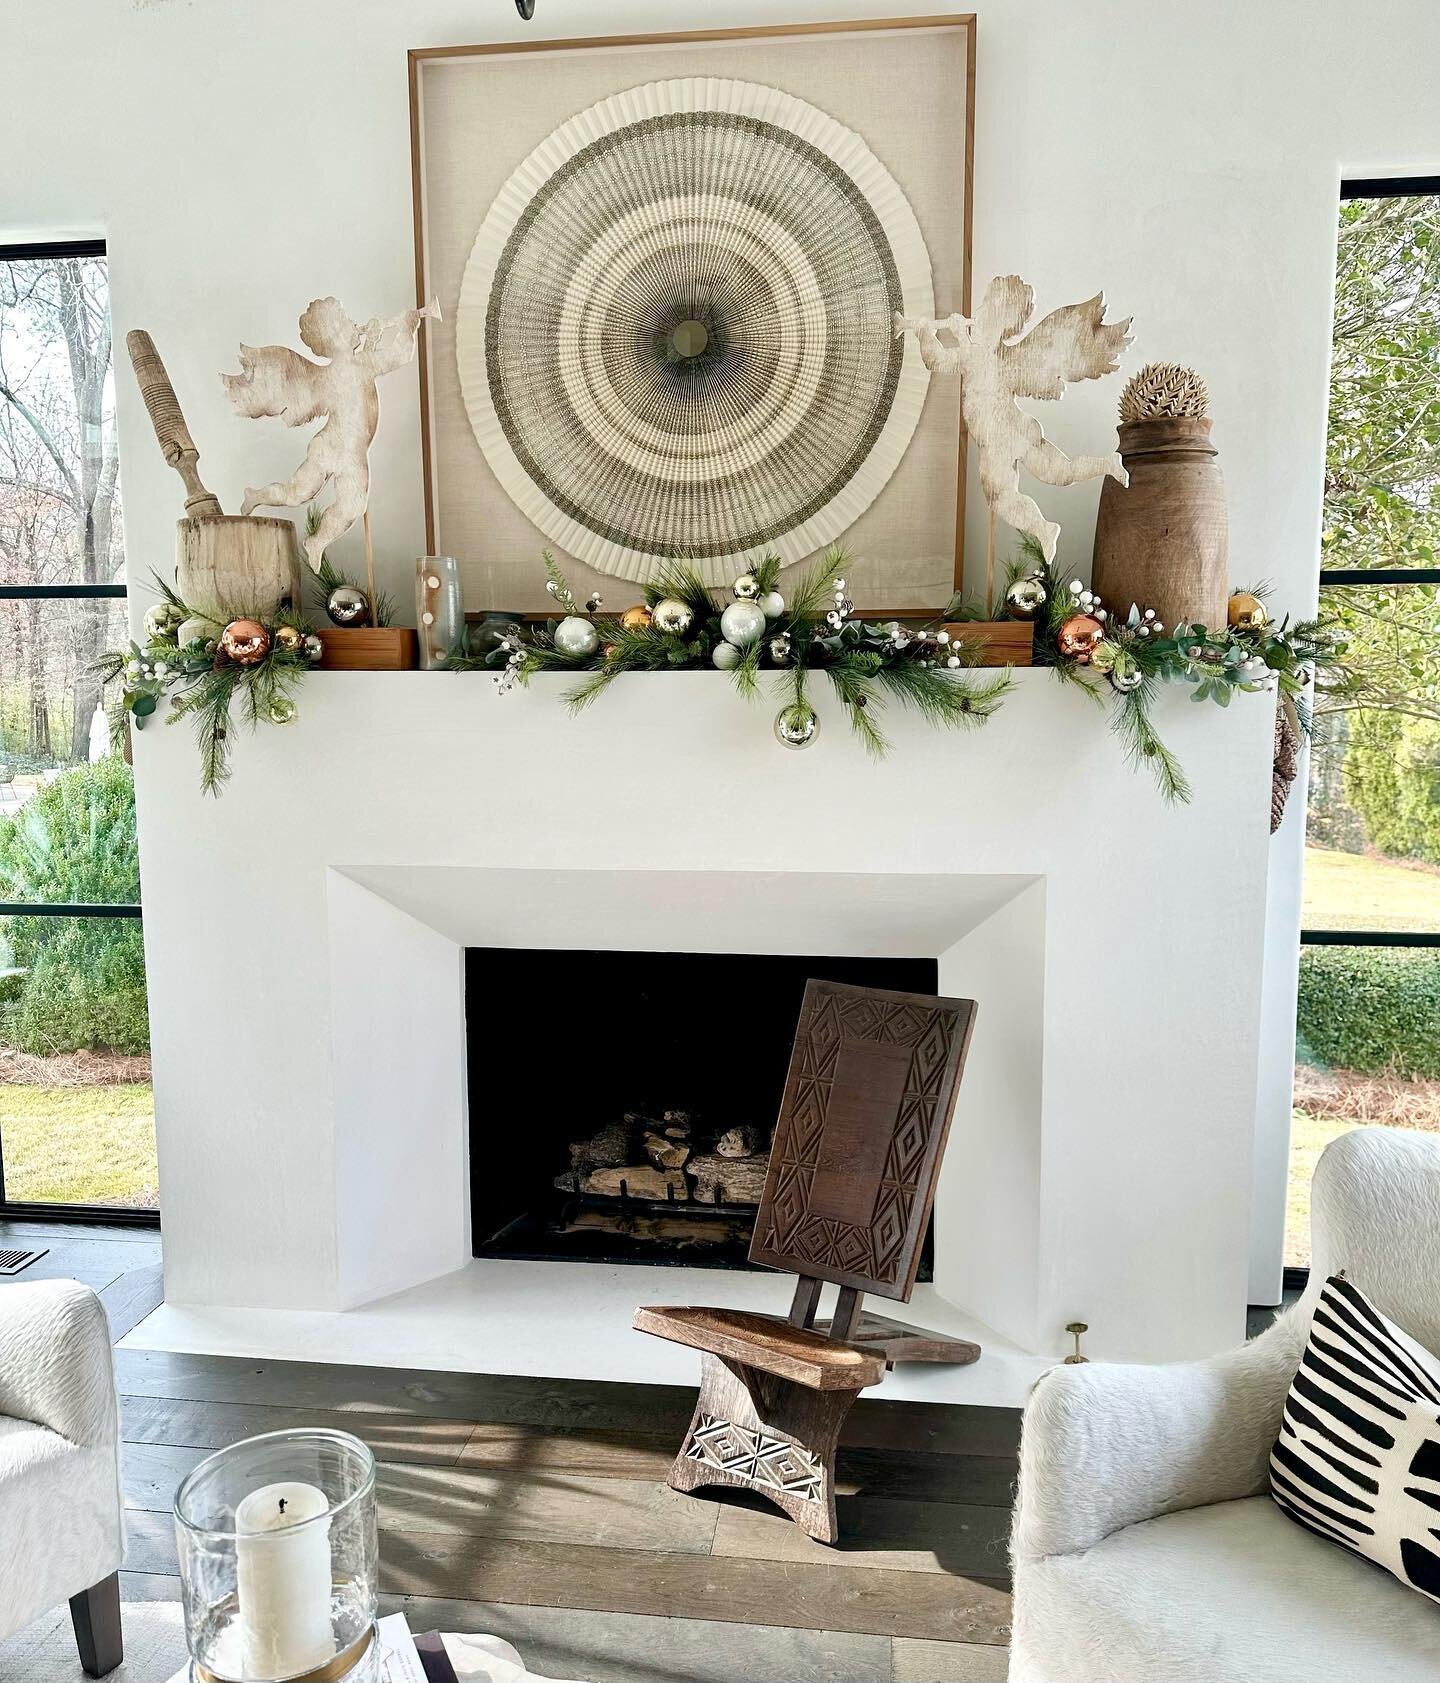 How beautiful is this mantle displaying vintage pieces with Christmas decor? It adds so much warmth to the room.

Stop by the studio today or tomorrow to view our antique accessories and receive 20% off of your total purchase.
.
.
.
#interiordesign #